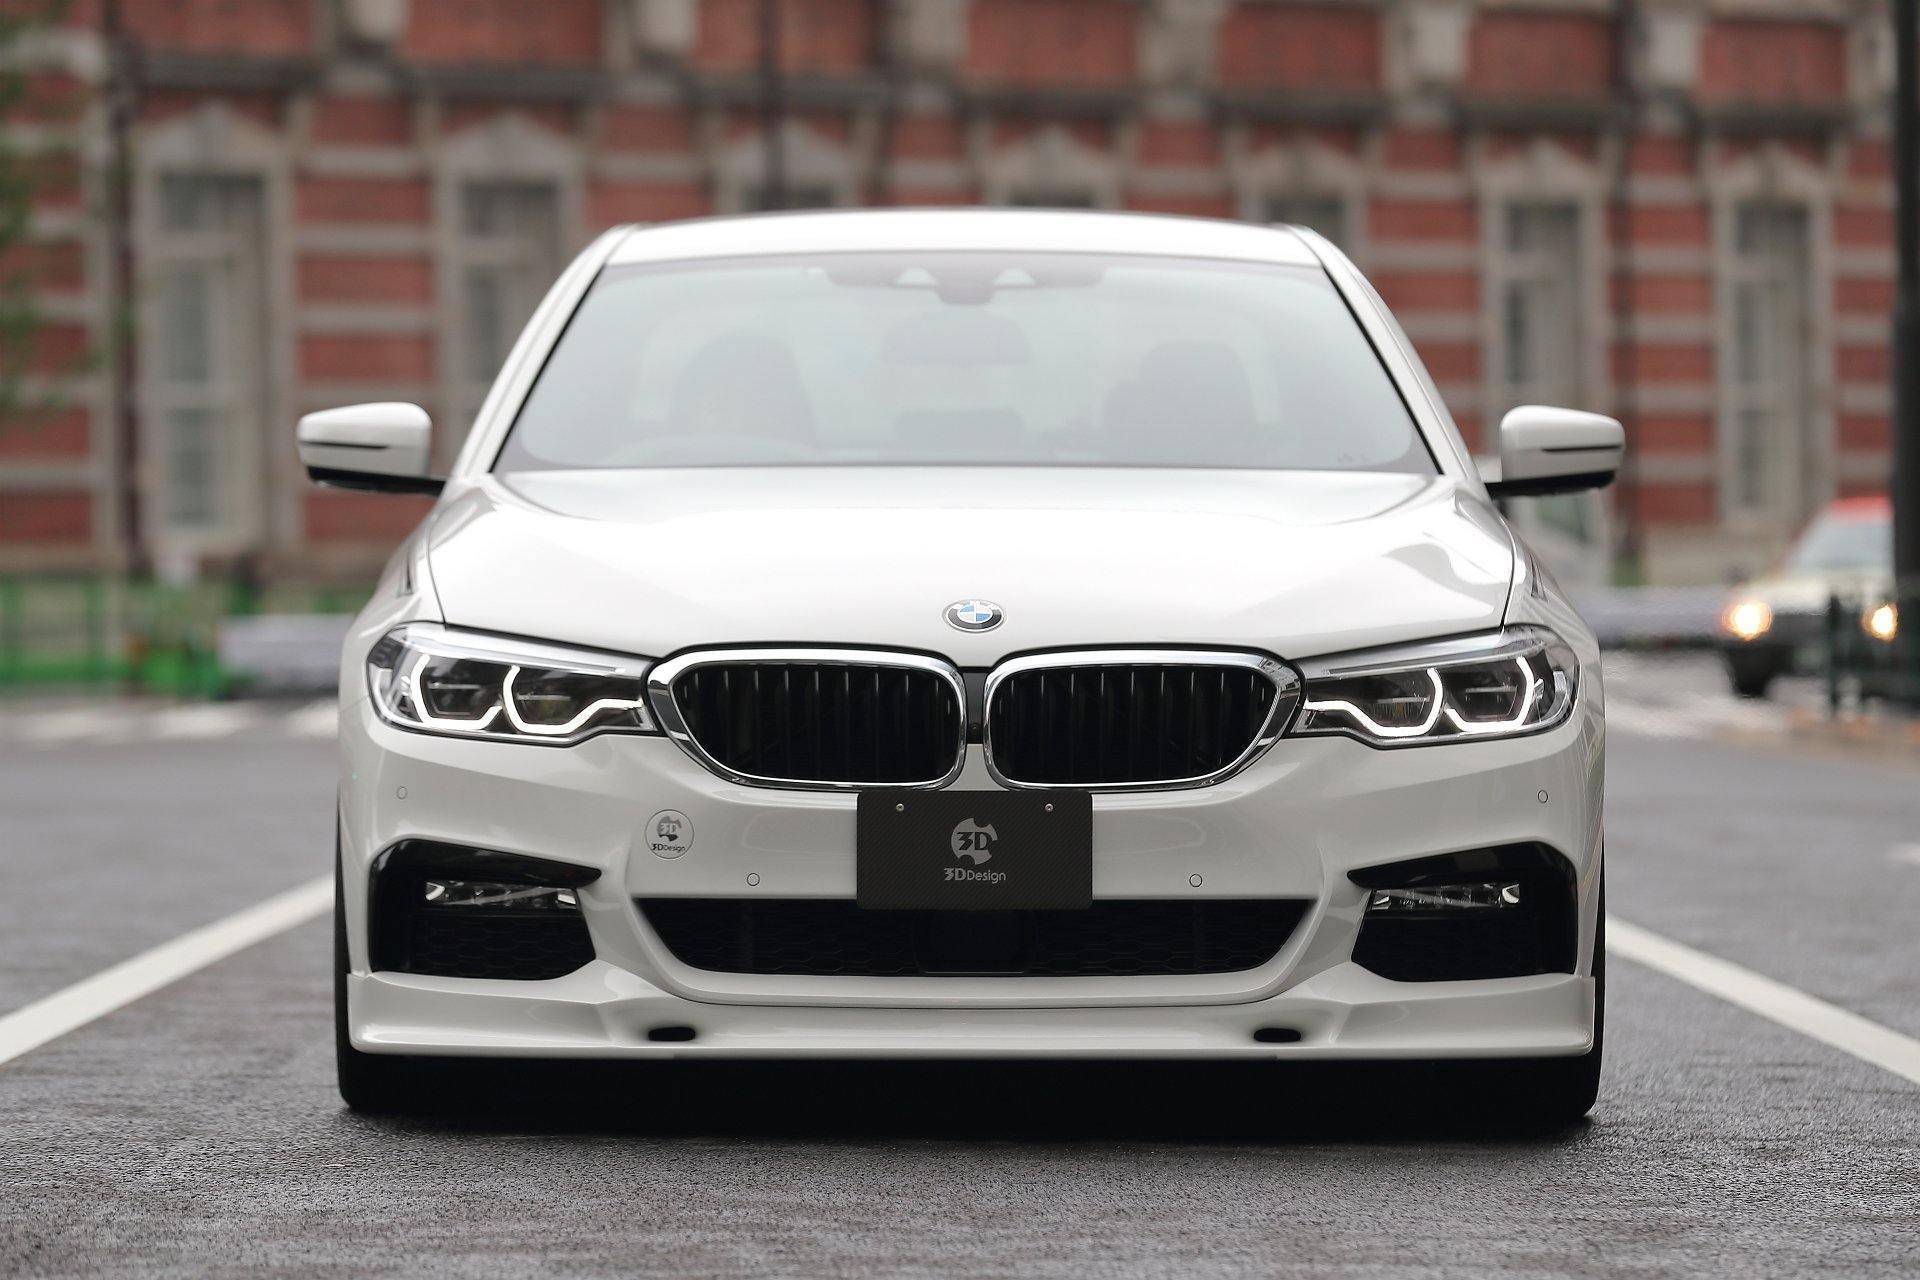 Front GRILLE for BMW 5 Series G30 G31 (17-20), Diamond 3d Design